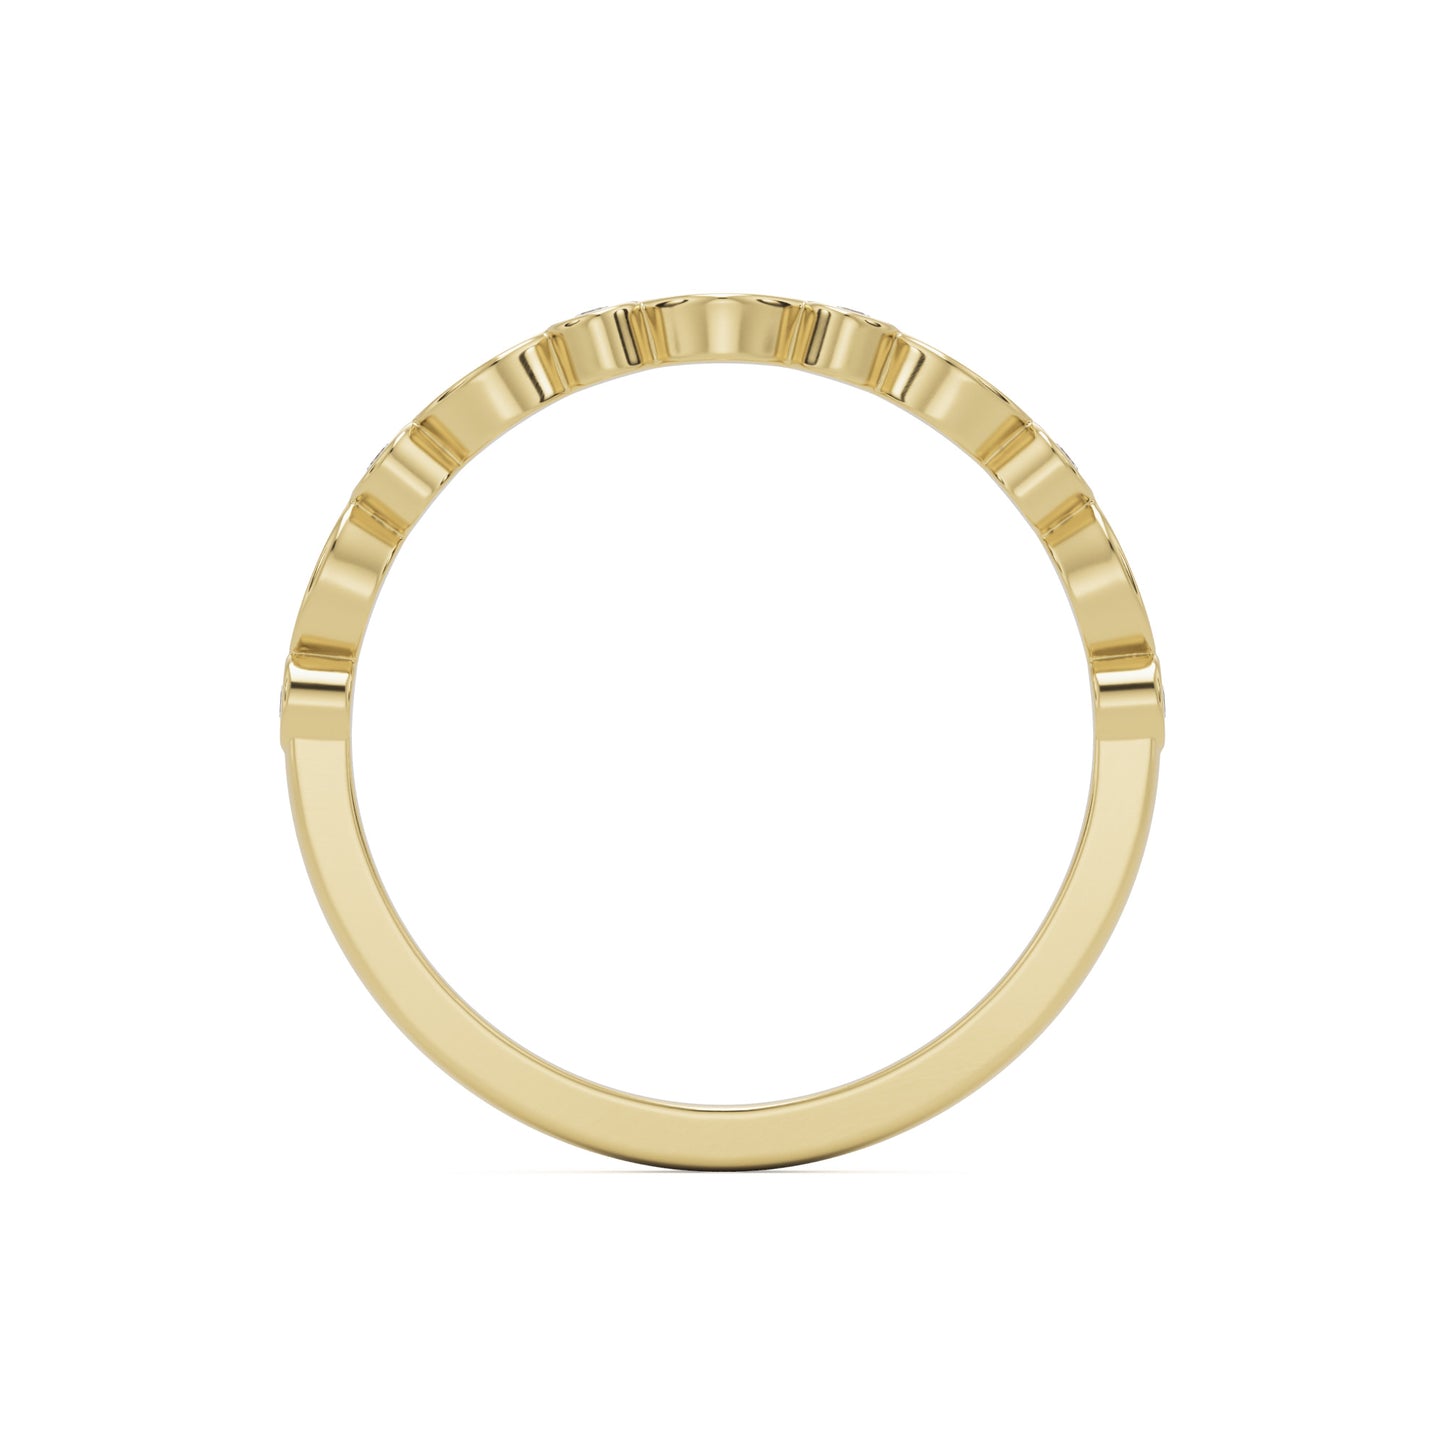 marquise 14k yellow gold